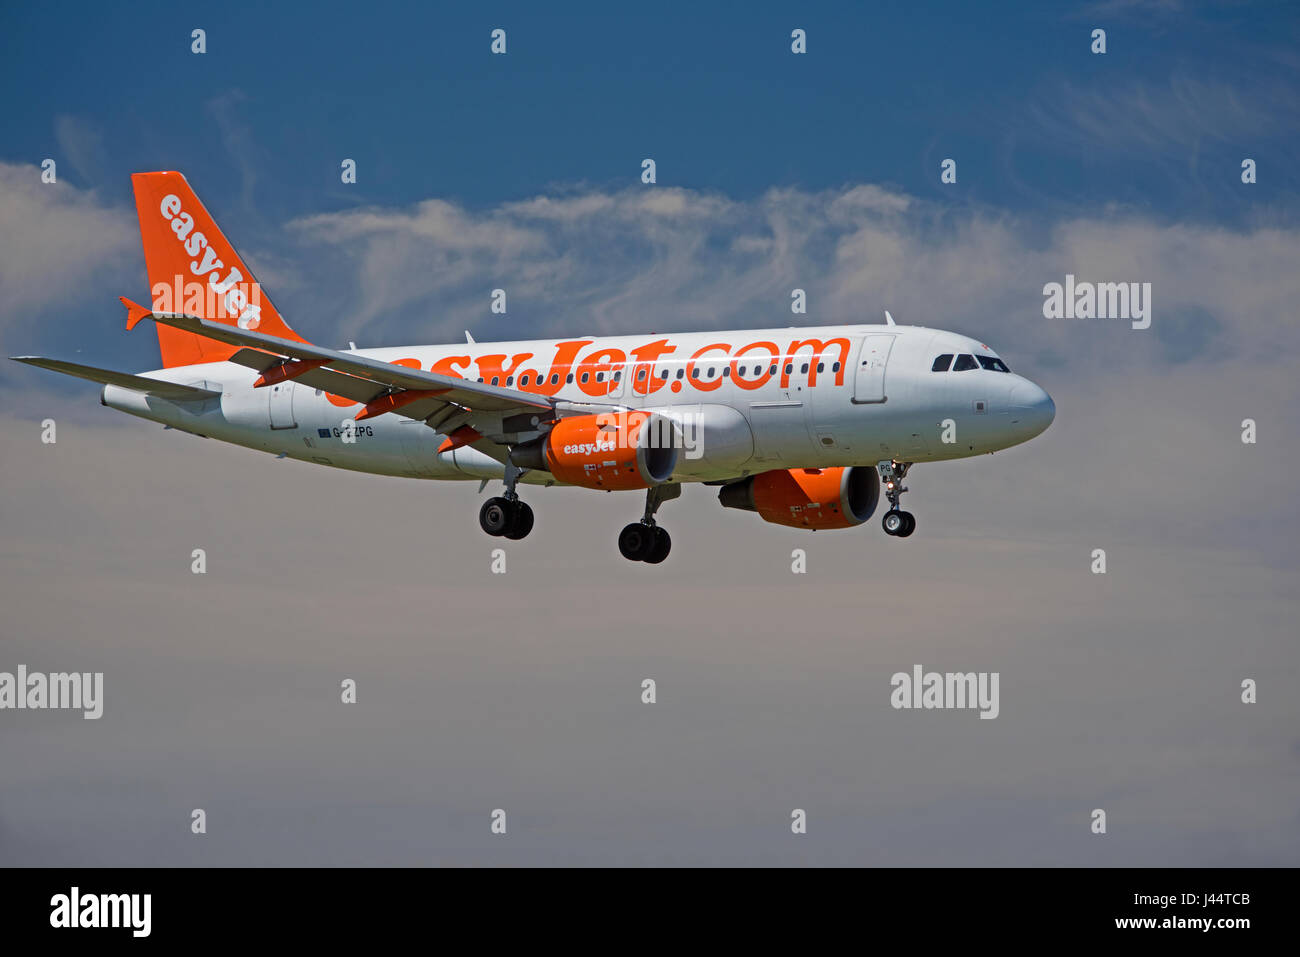 Easyjet commercial passenger Airbus A 320-214 aircraft in its unmistakeable company orange livery Stock Photo